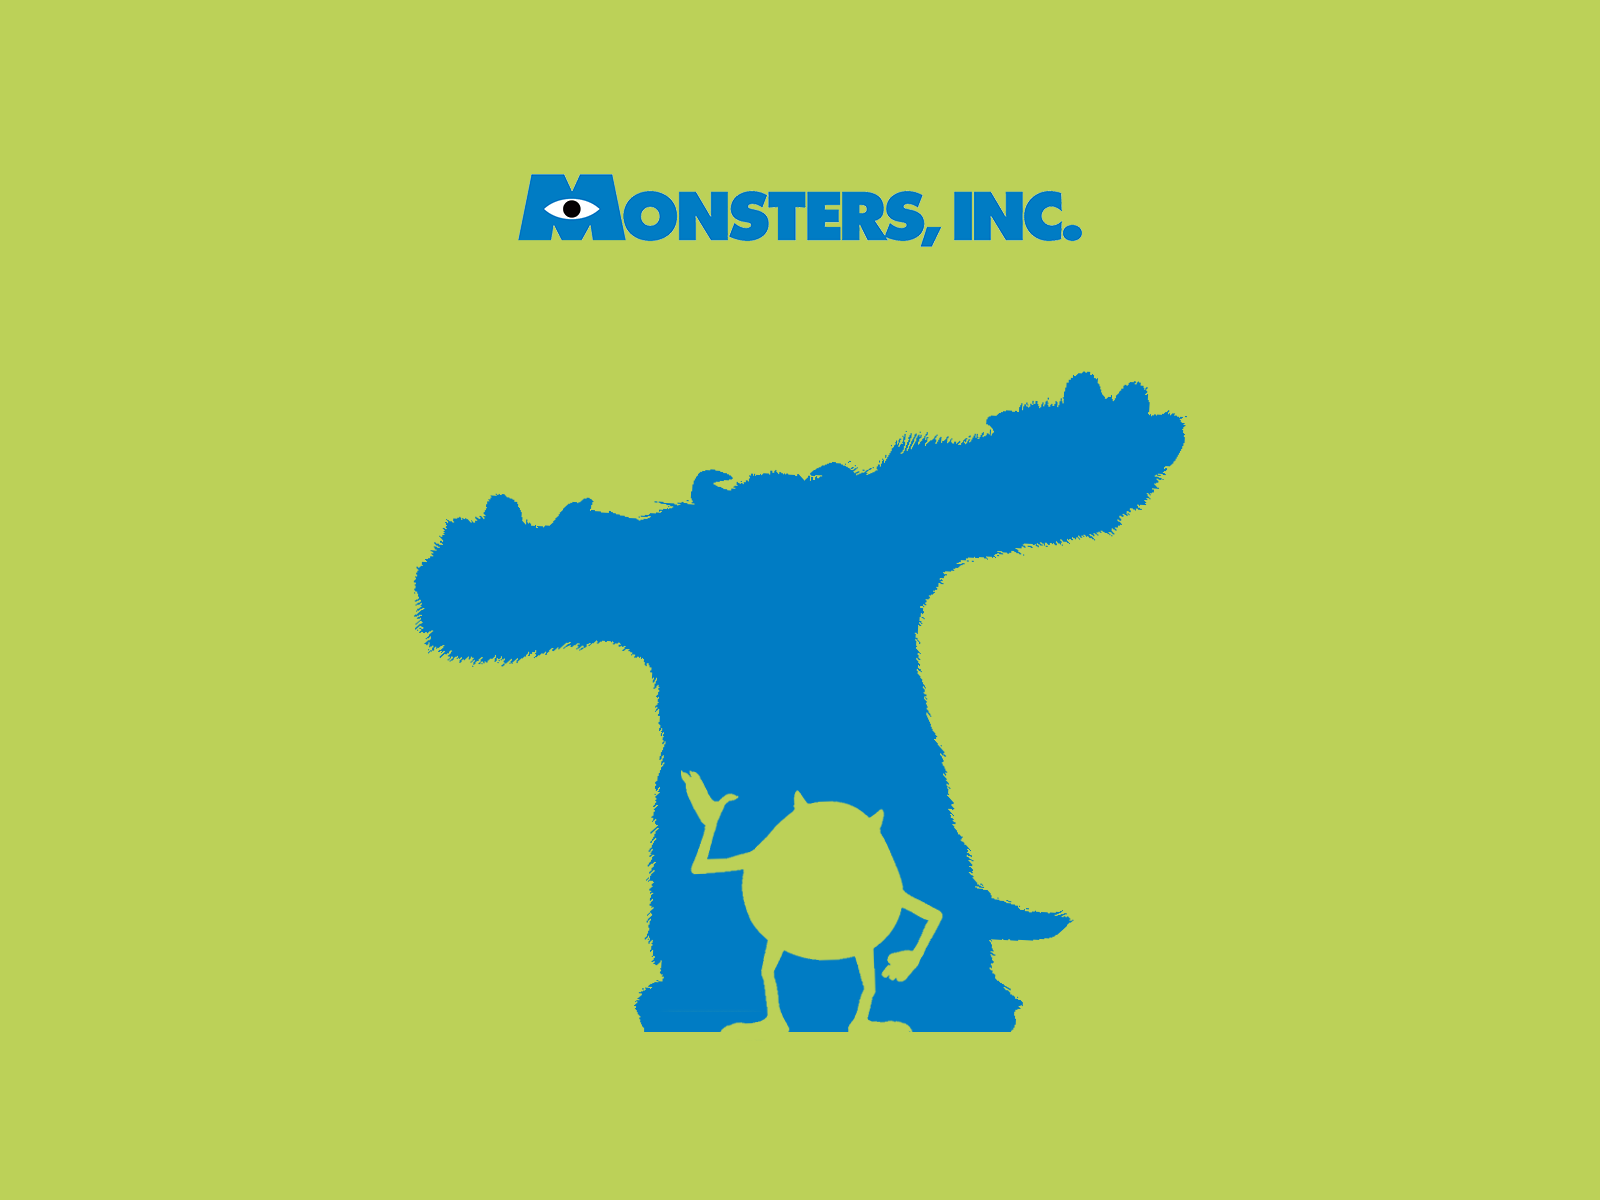 Monsters, Inc. Wallpaper and Background Image